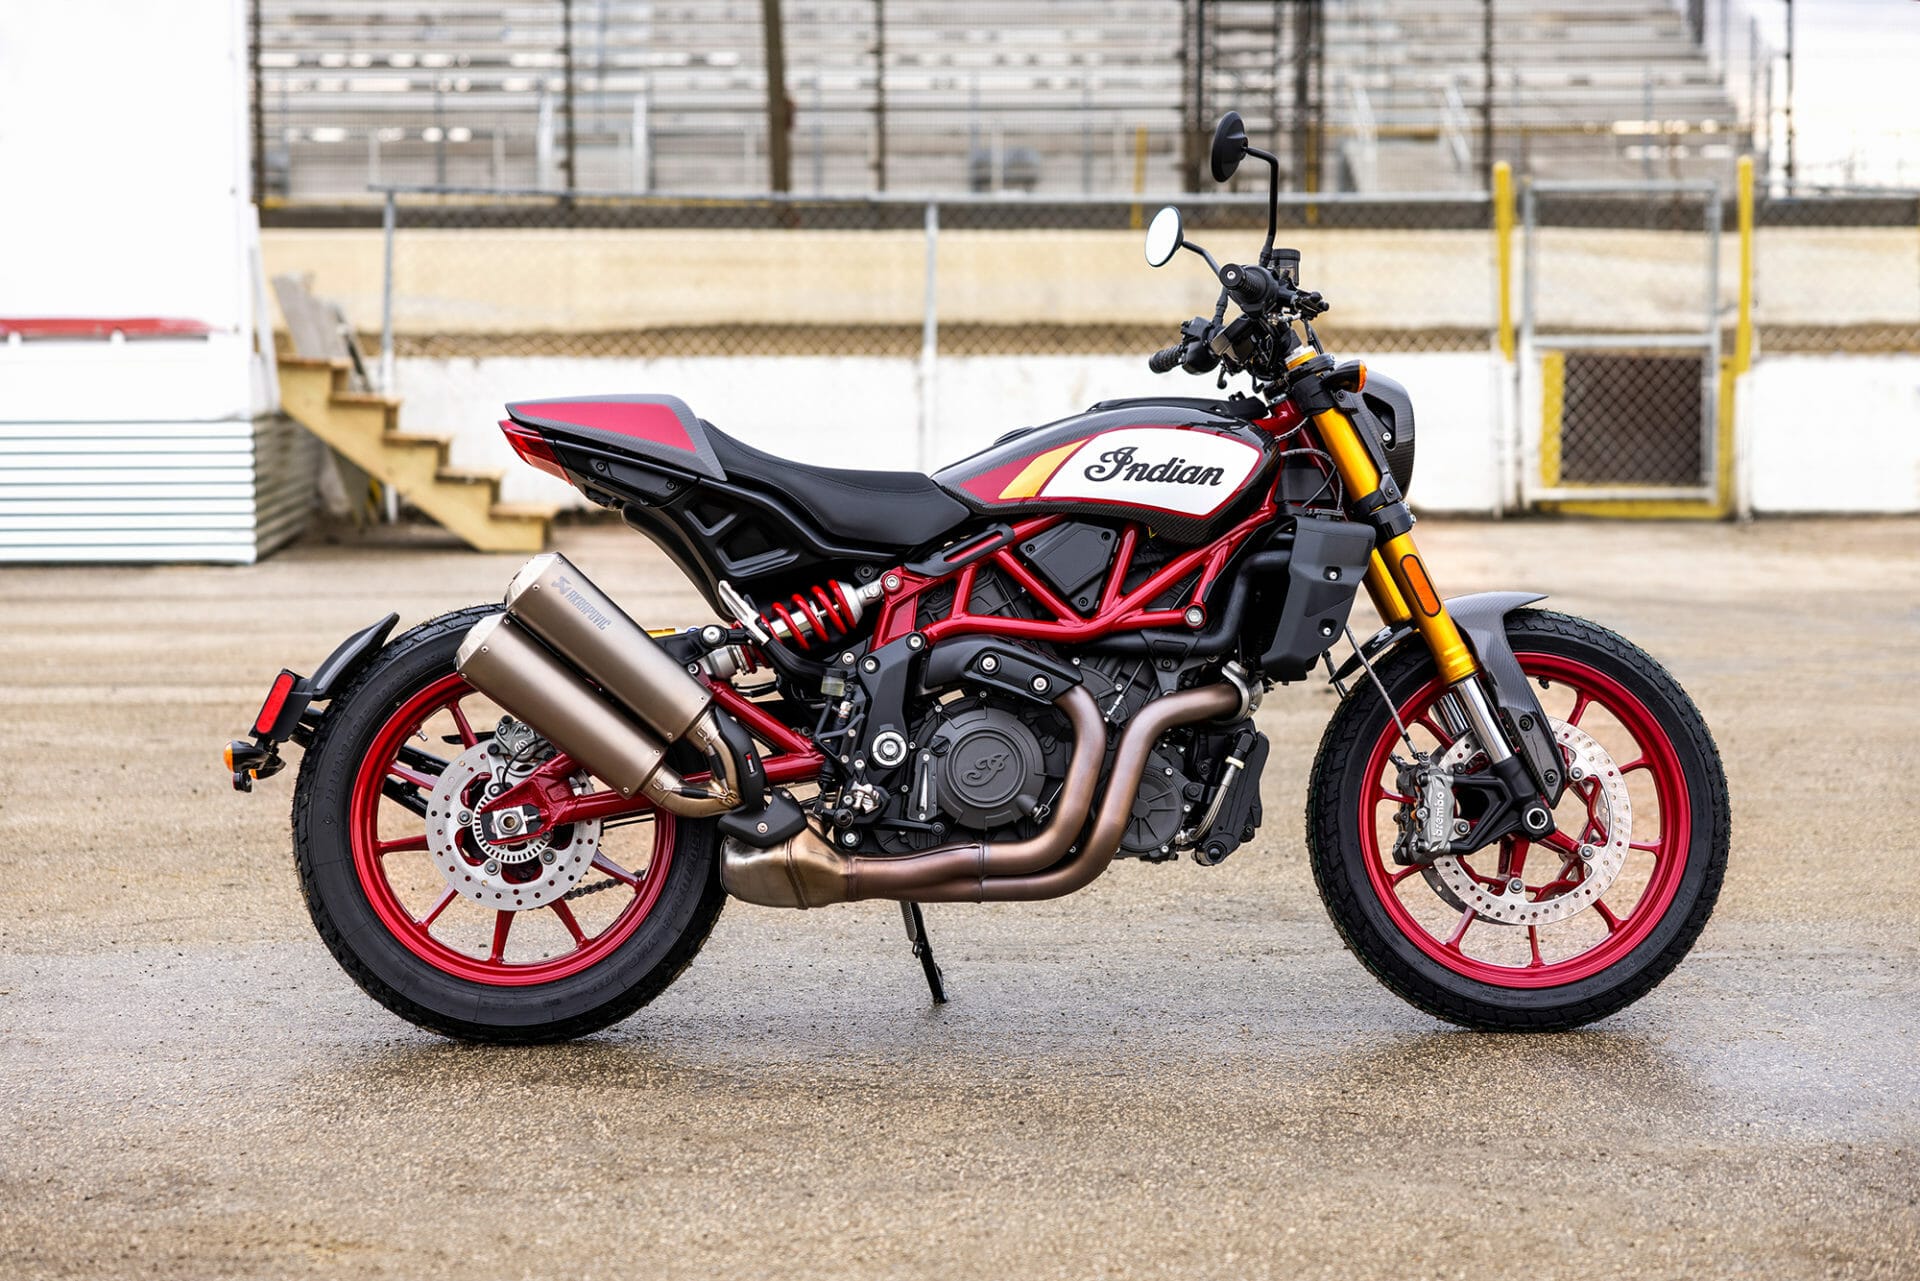 Indian FTR 1200 Championship Edition
- also in the MOTORCYCLES.NEWS APP